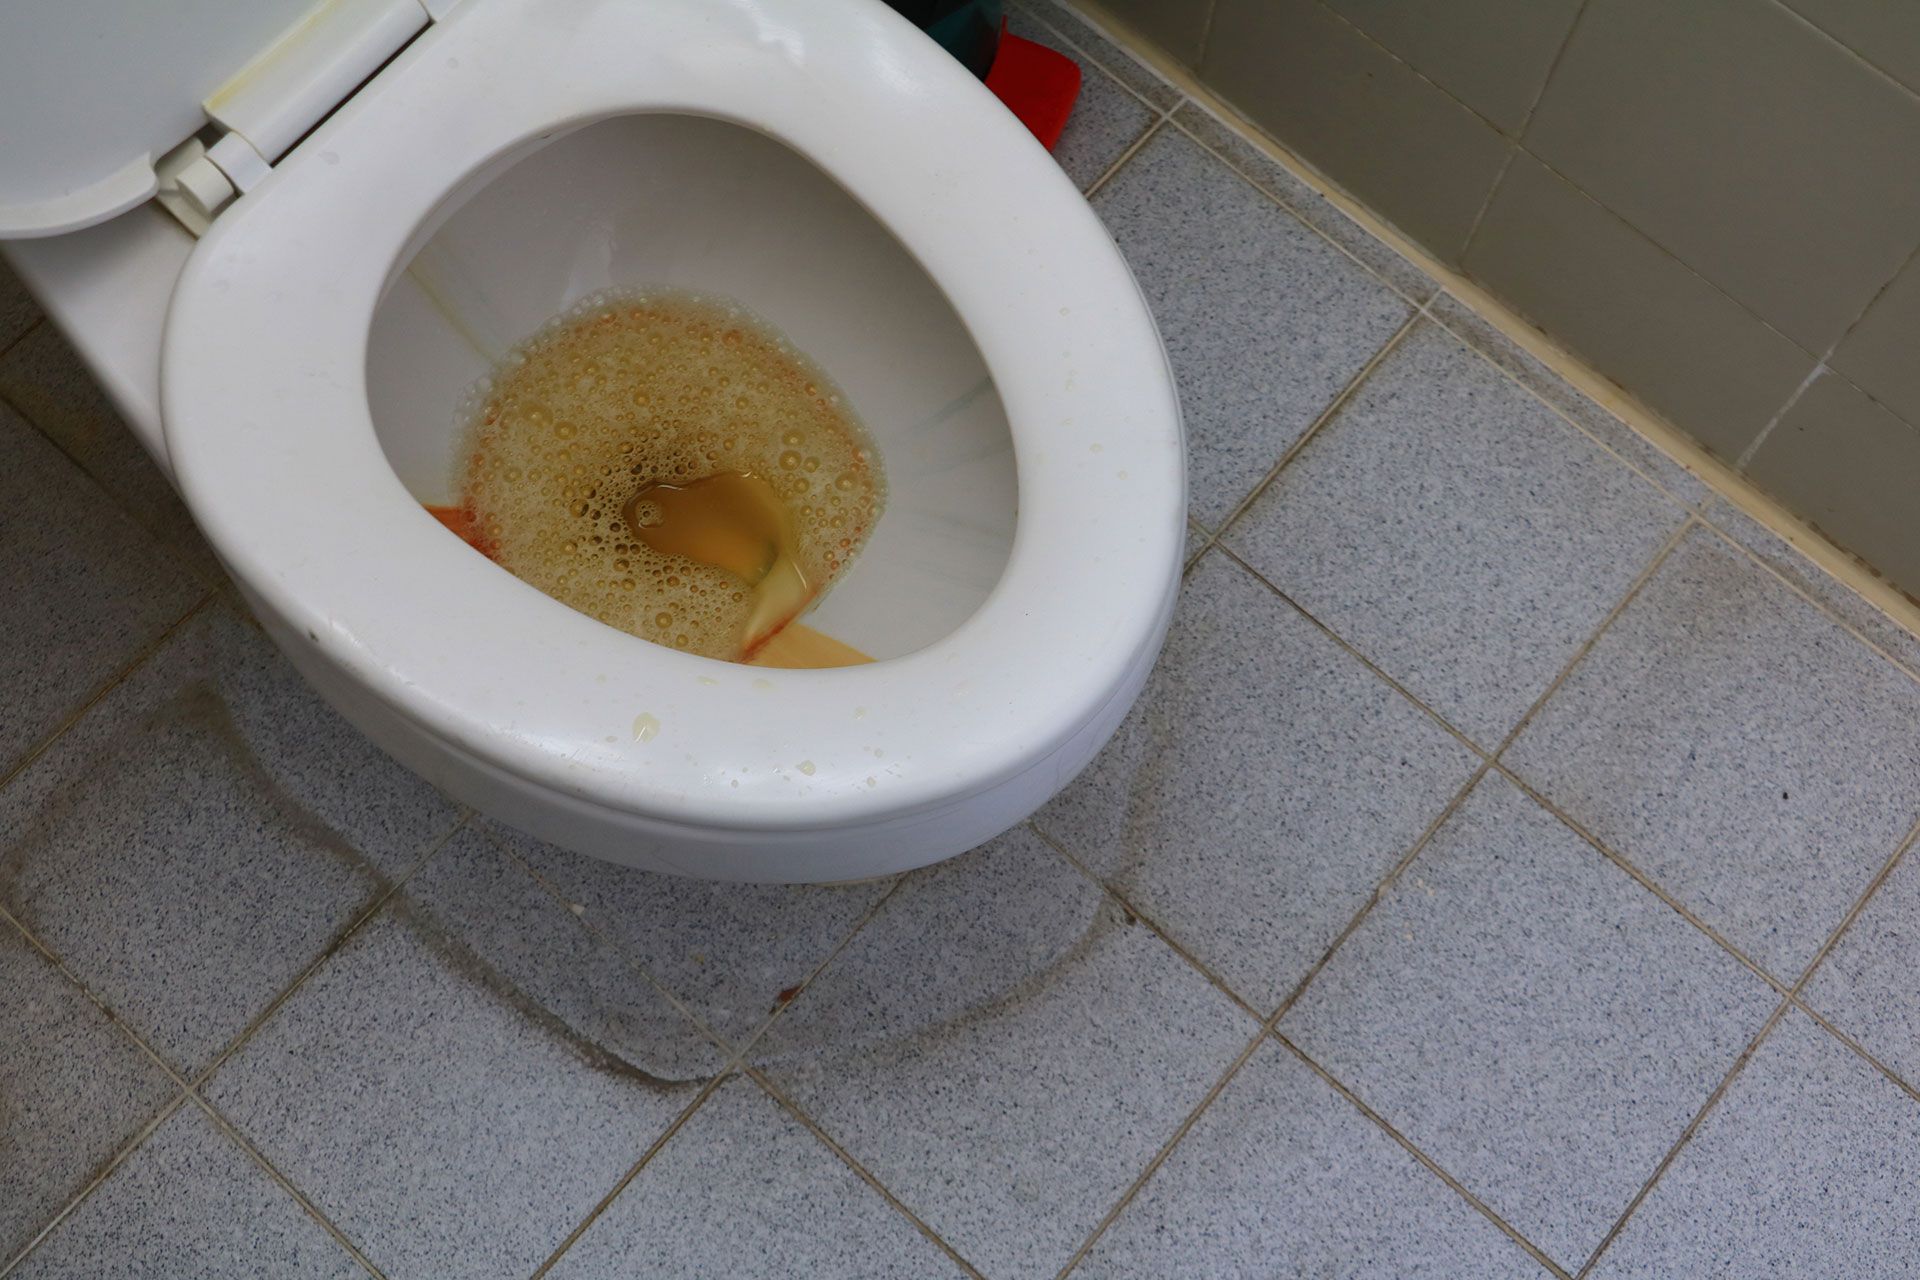 Clogged Toilet Repair Services in Kennesaw
